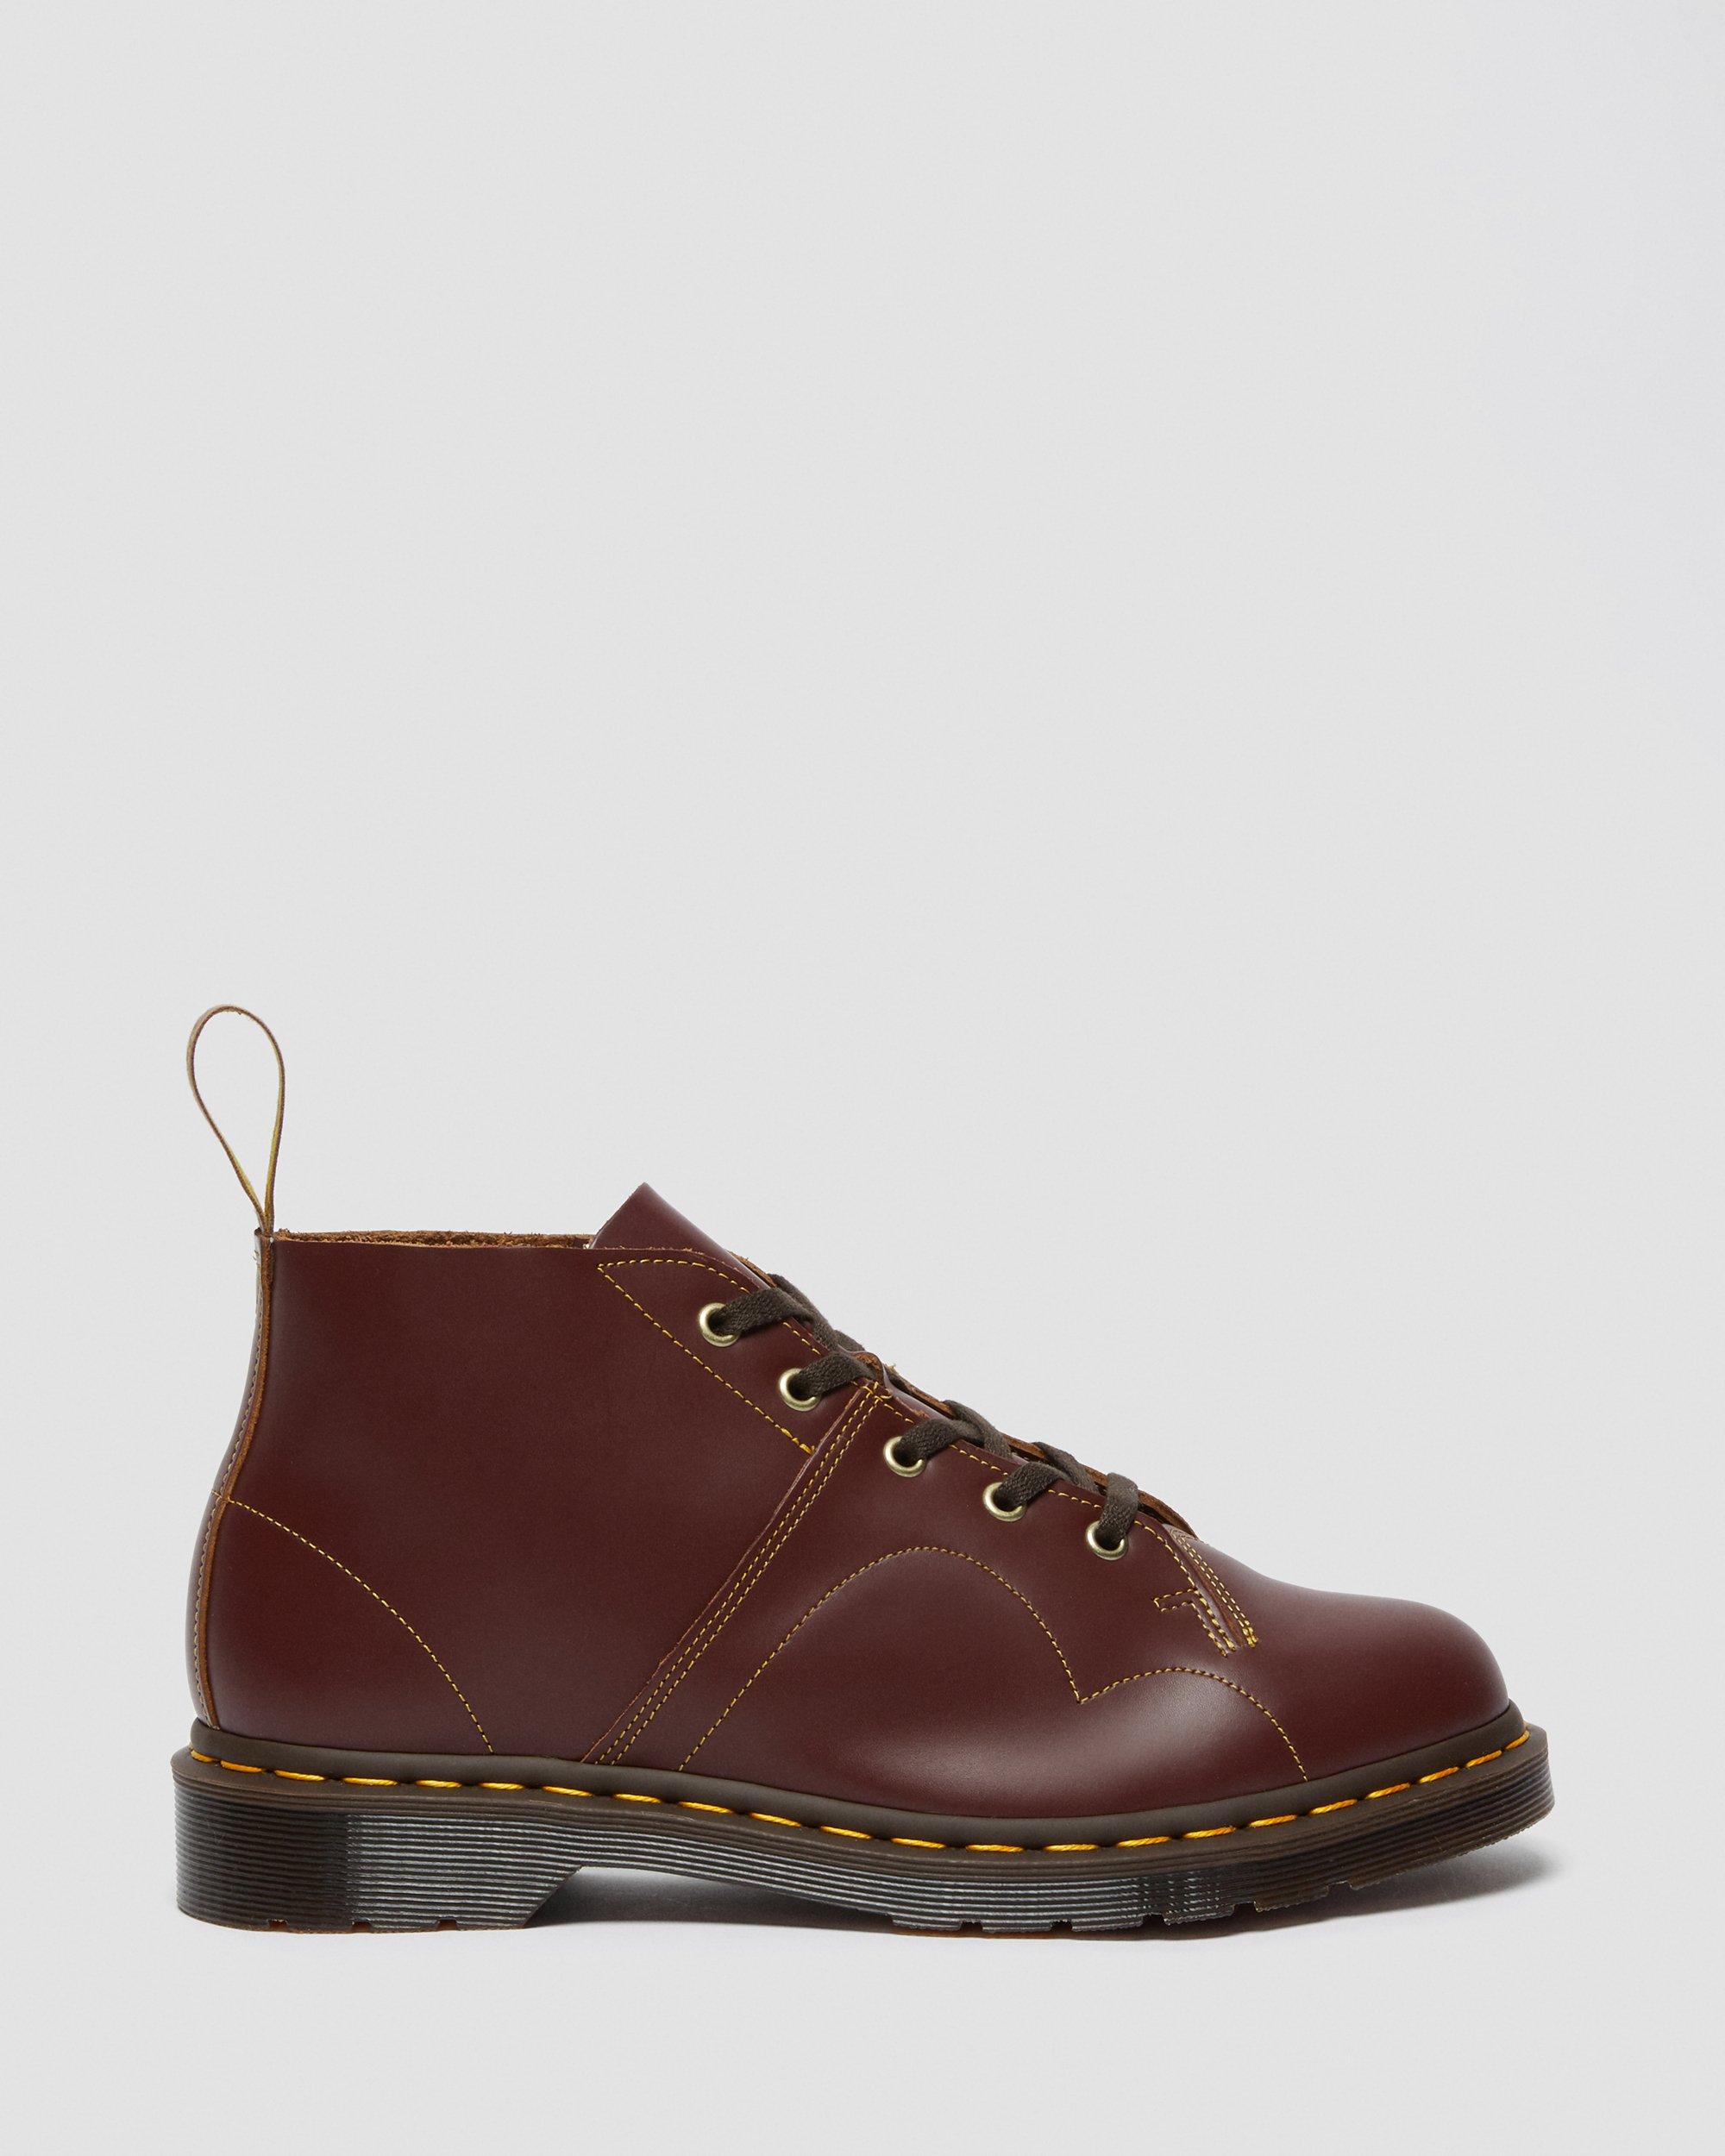 CHURCH LEATHER MONKEY BOOTS | Dr. Martens